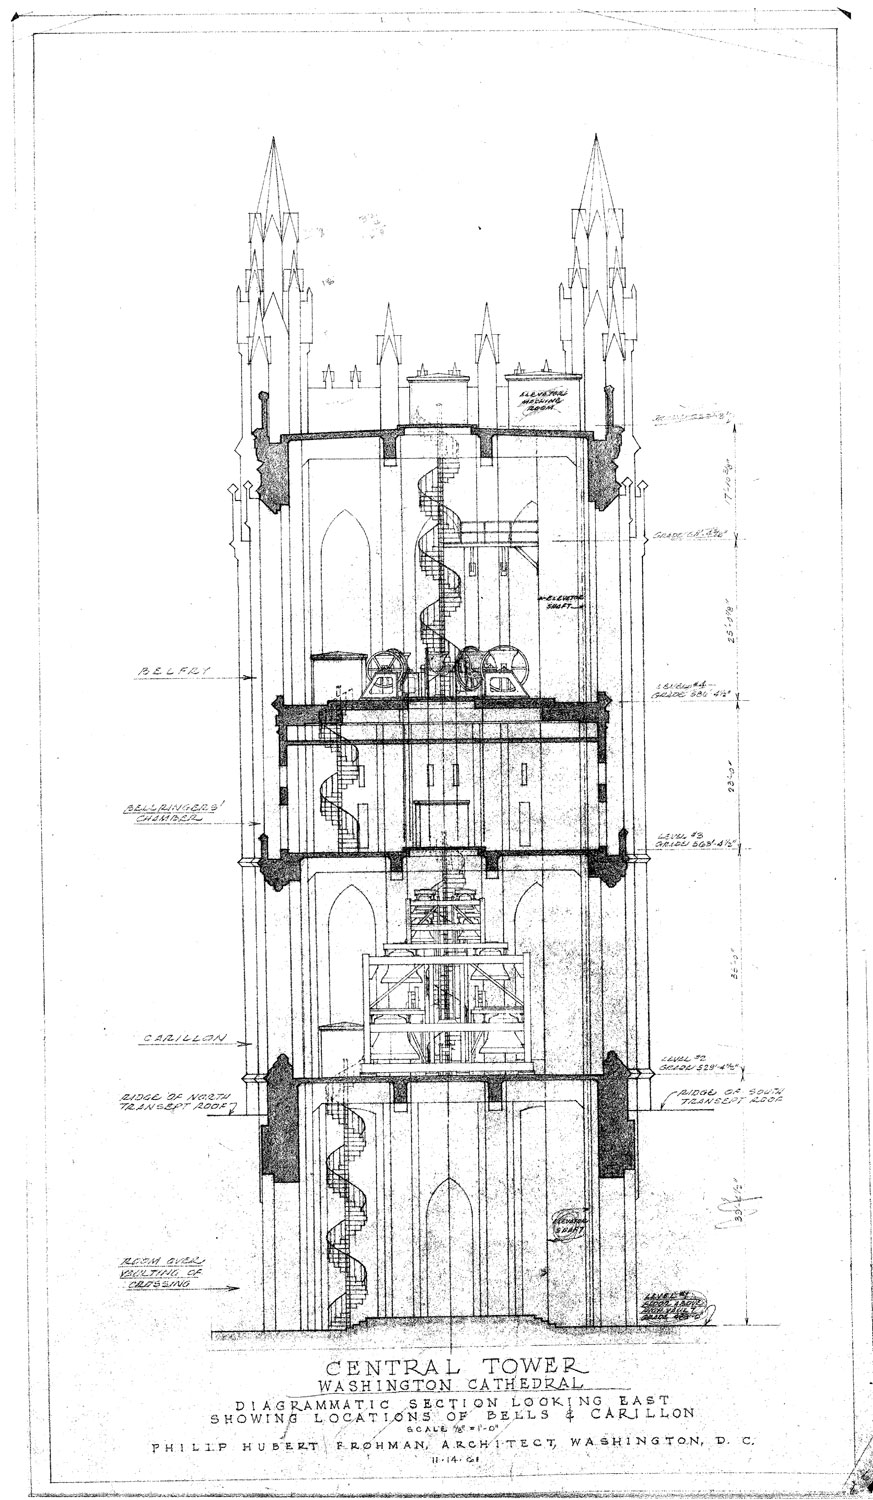 Central Tower, Washington Cathedral, Diagrammatic Section Looking East, Showing Location of Bells and Carillon, 1961. Courtesy of Washington National Cathedral Construction Archives Collection, National Building Museum Collection.